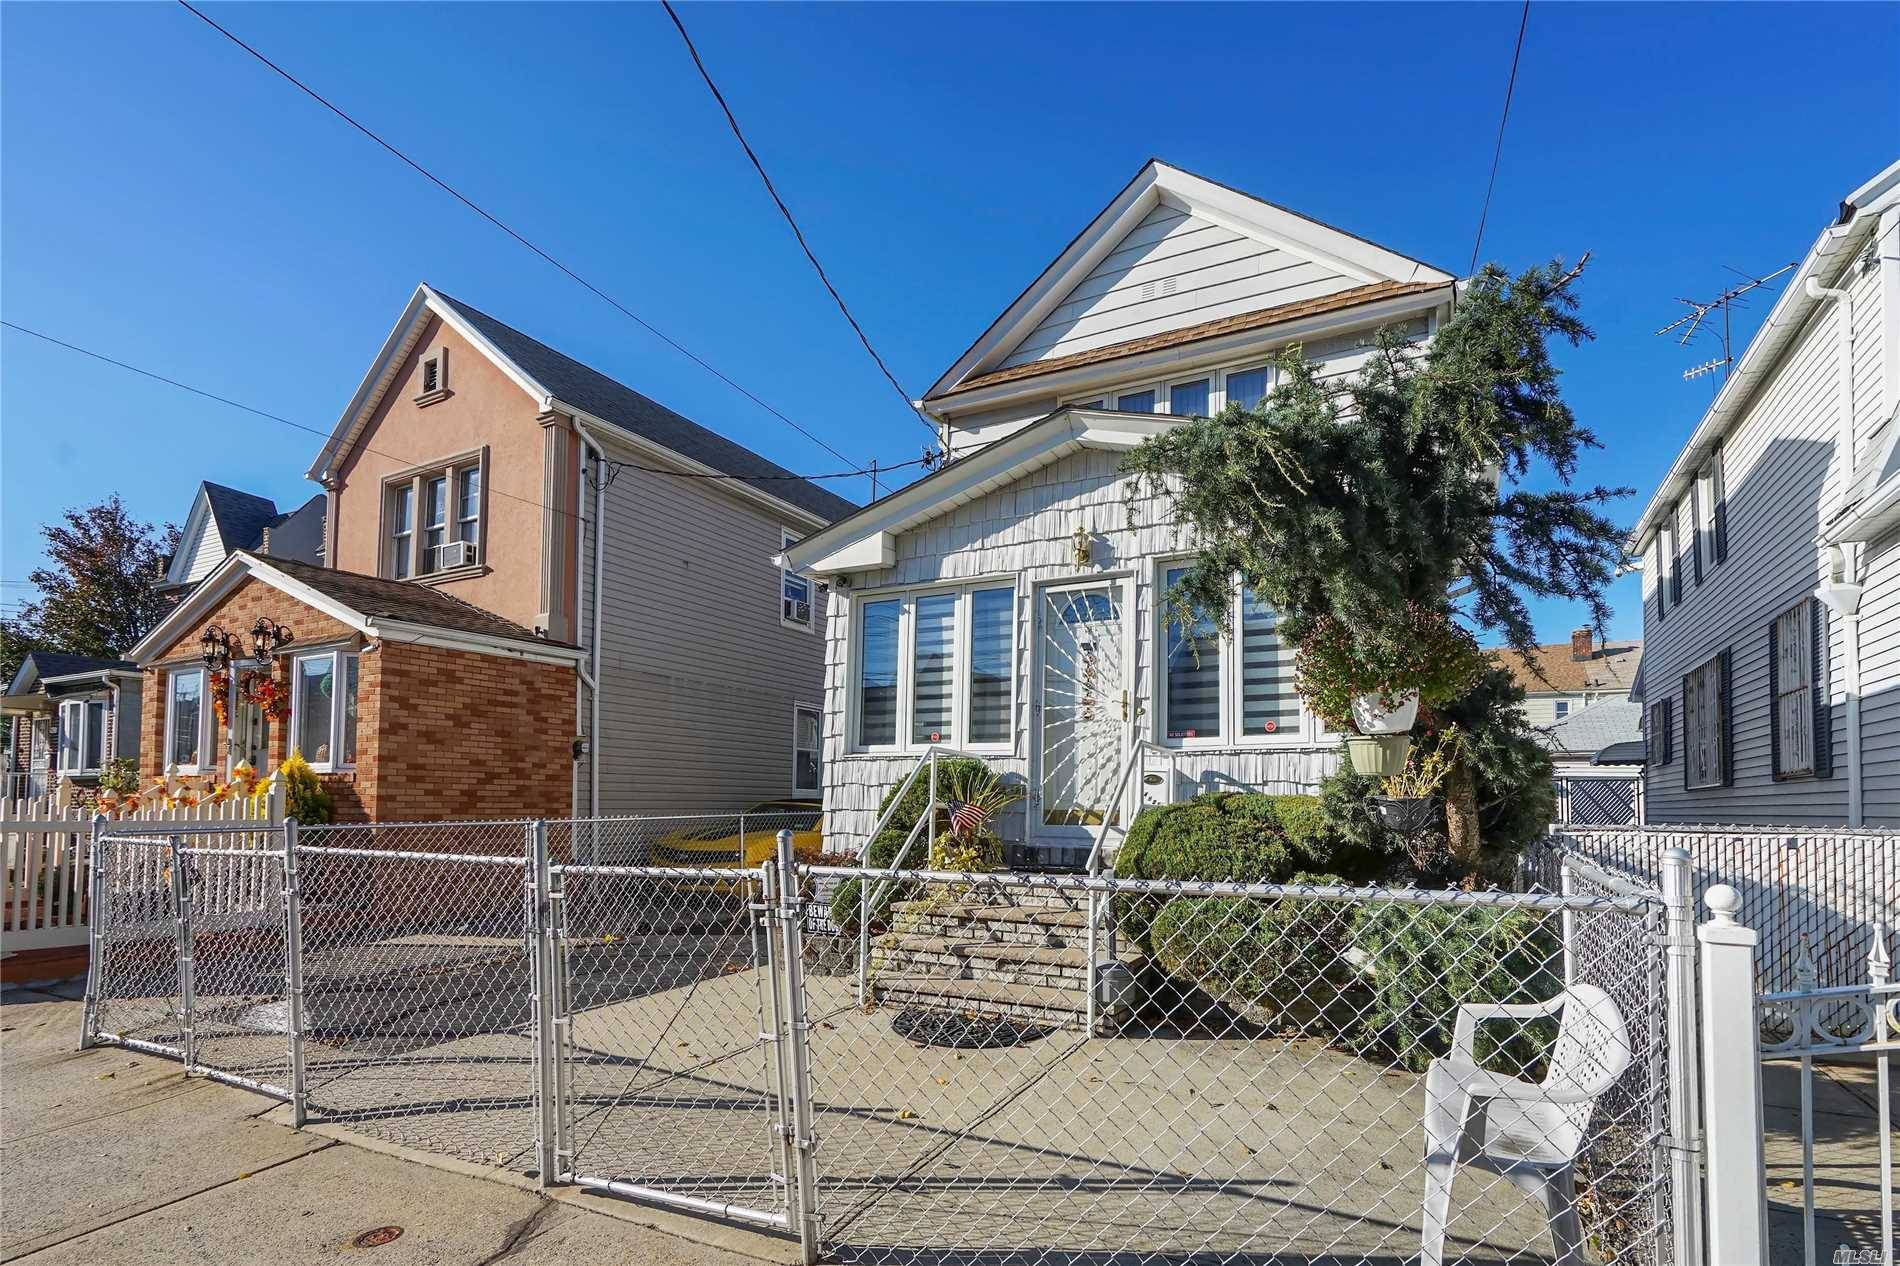 Beautiful 1 Family Home In The Heart Of Ozone Park.